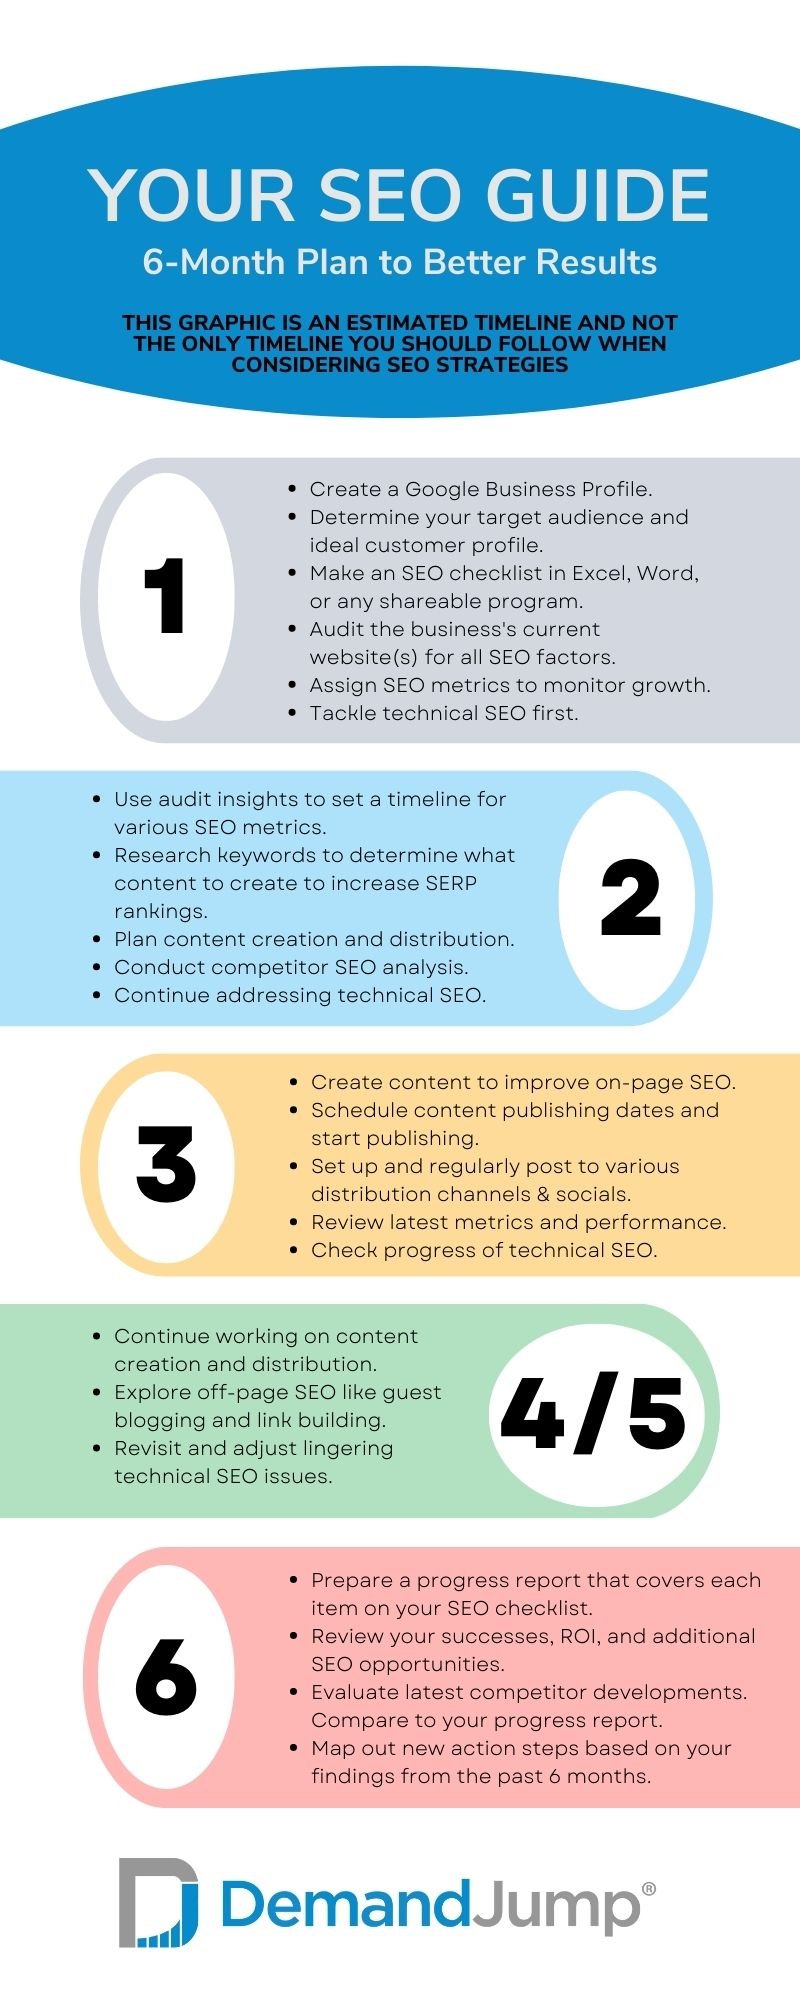 Your SEO Guide